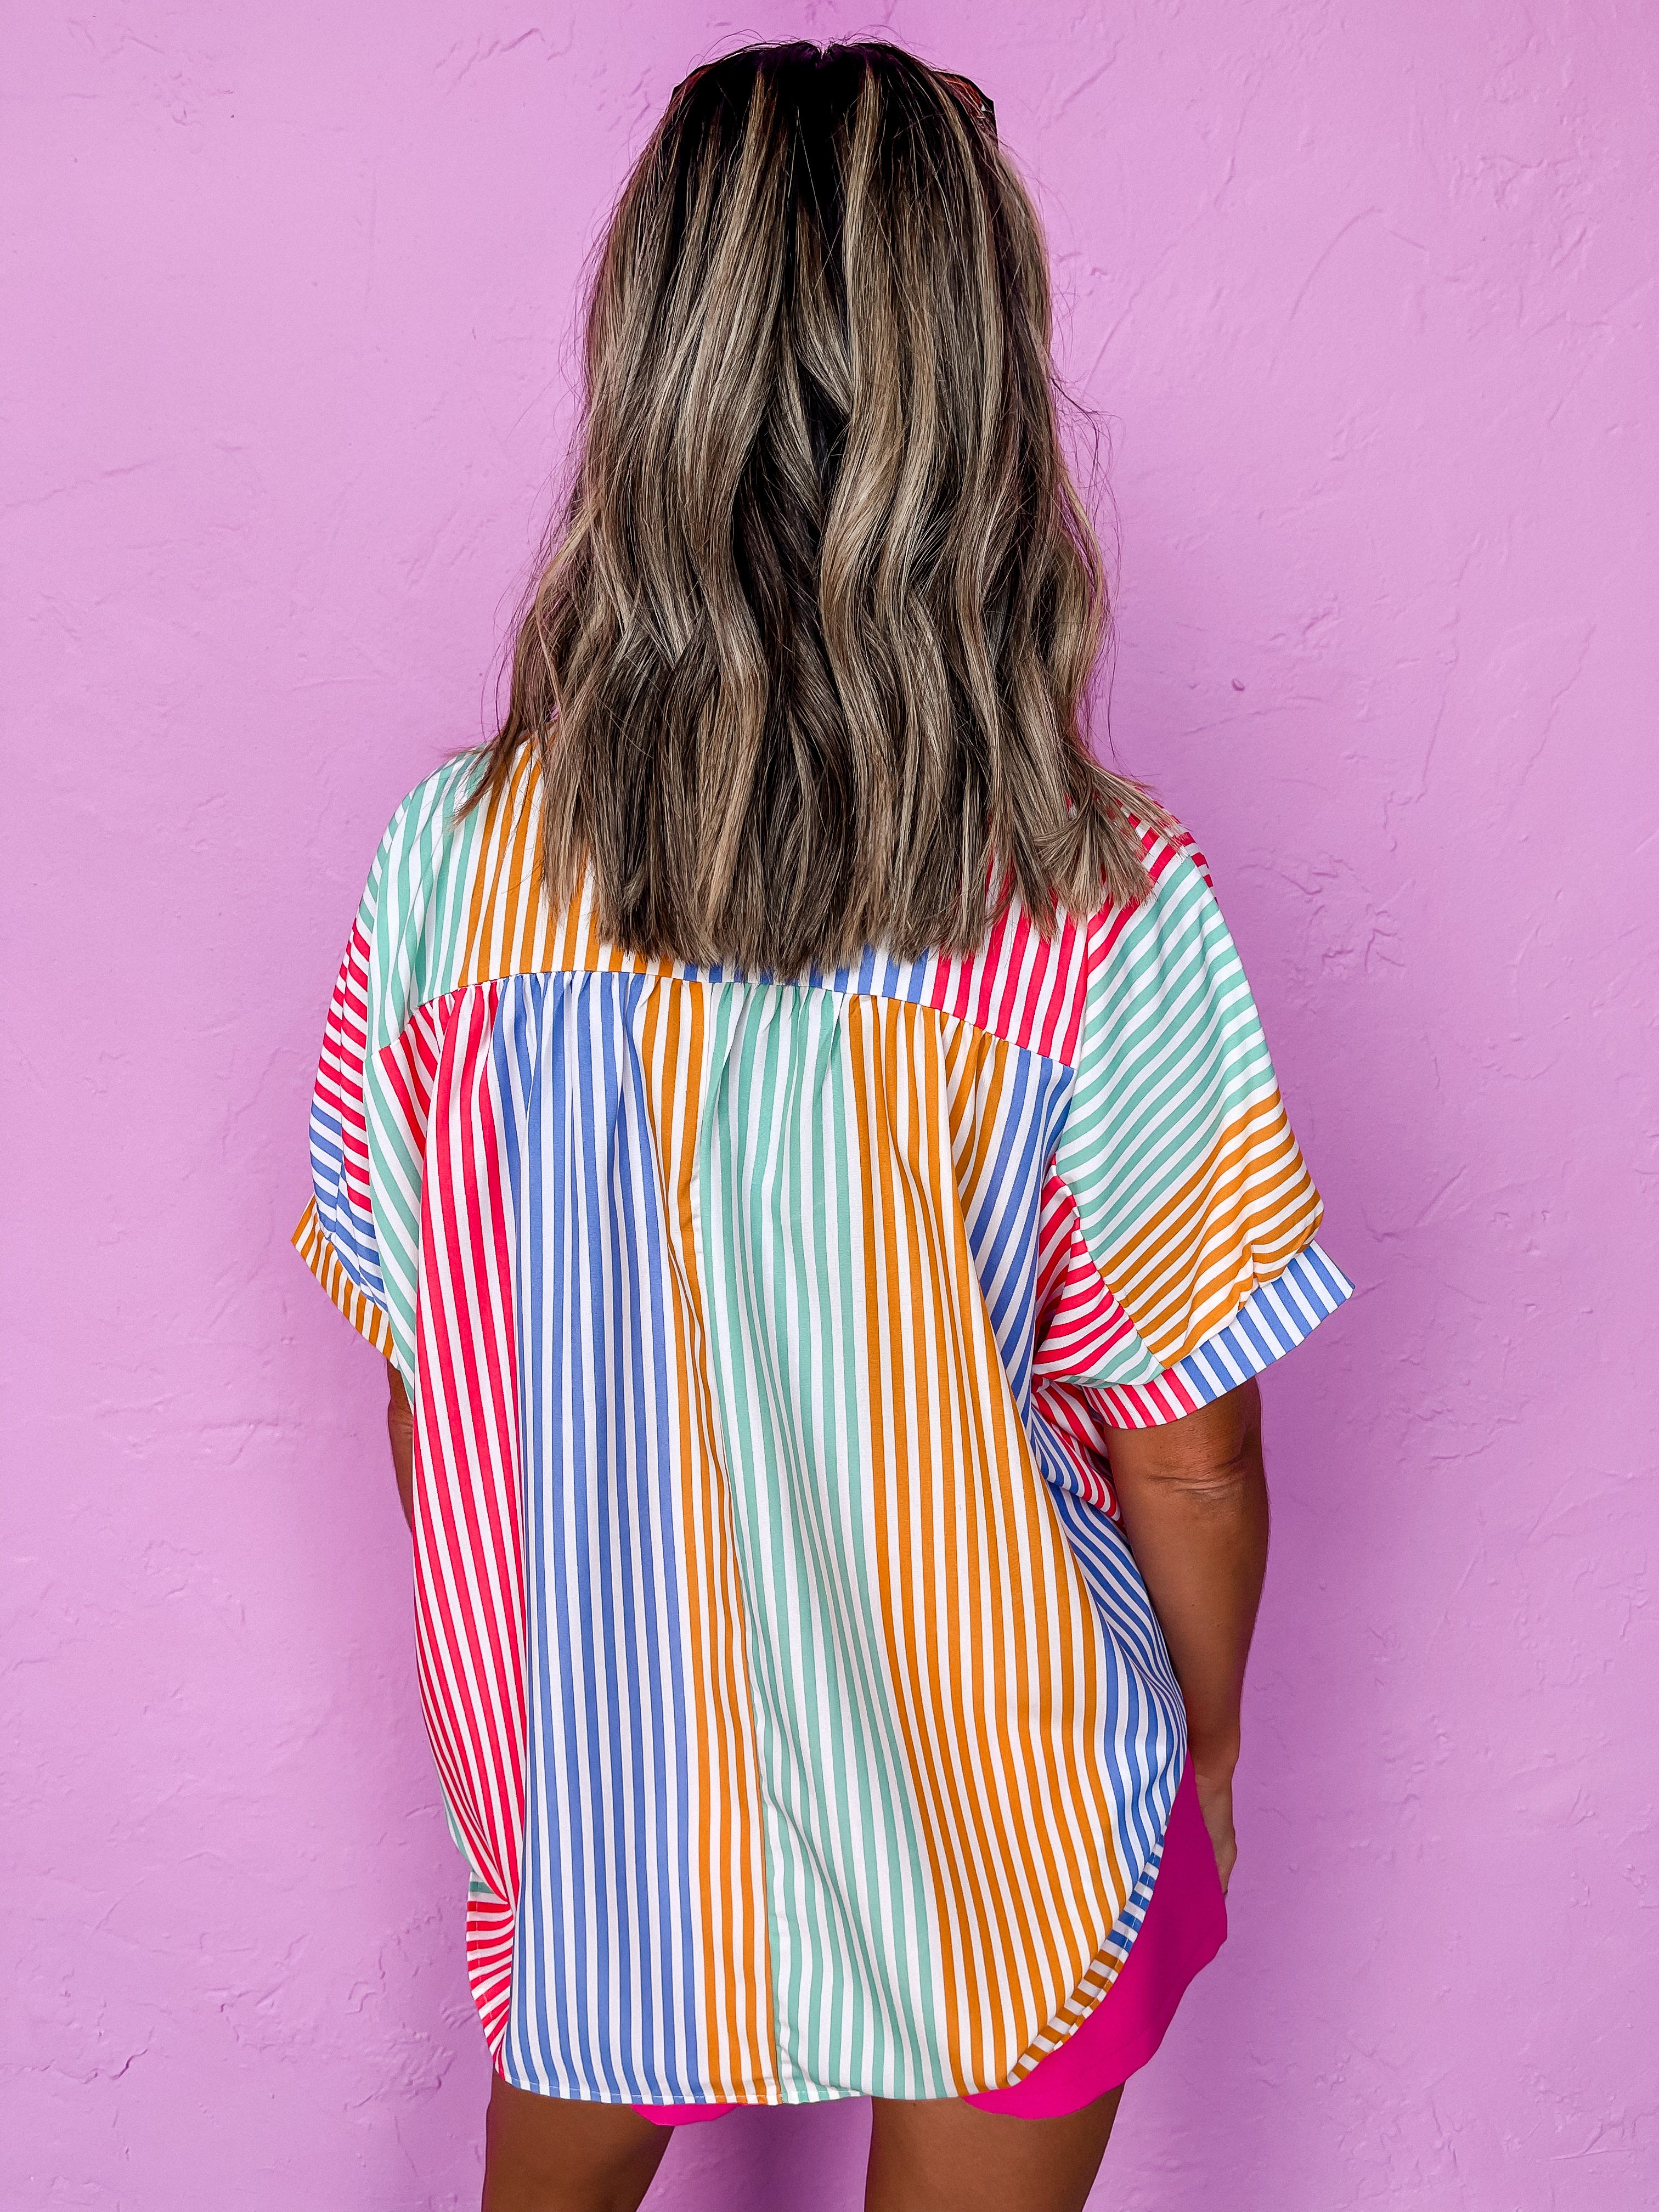 Sunday Fun Day Striped Button Front Top